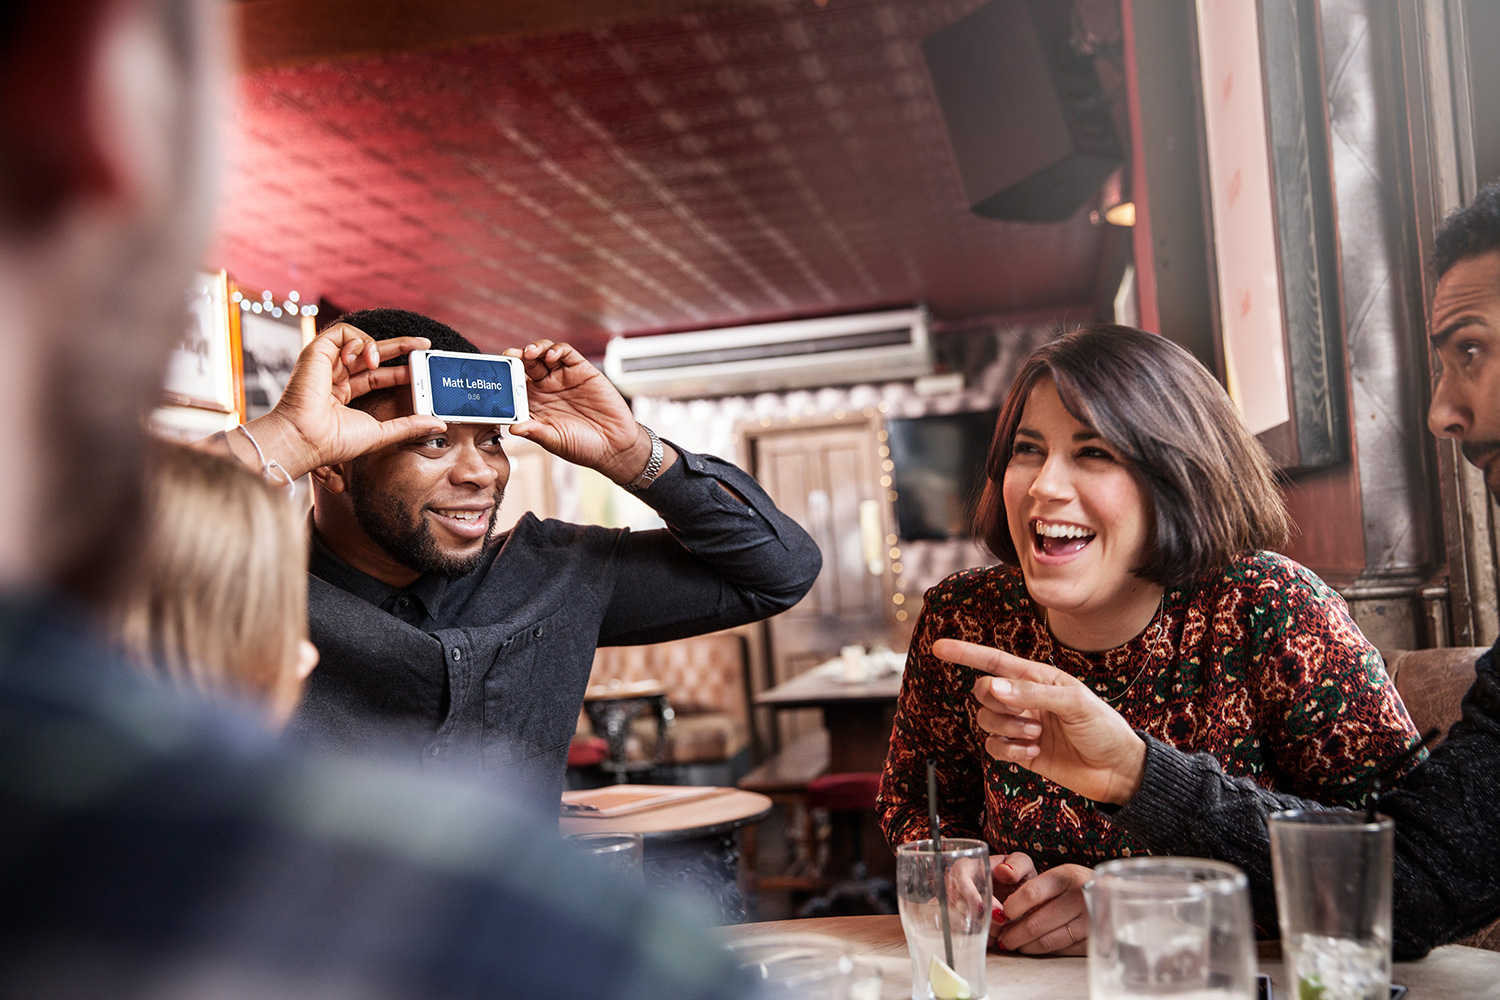 smartphone party game apps heads-up lifestyle